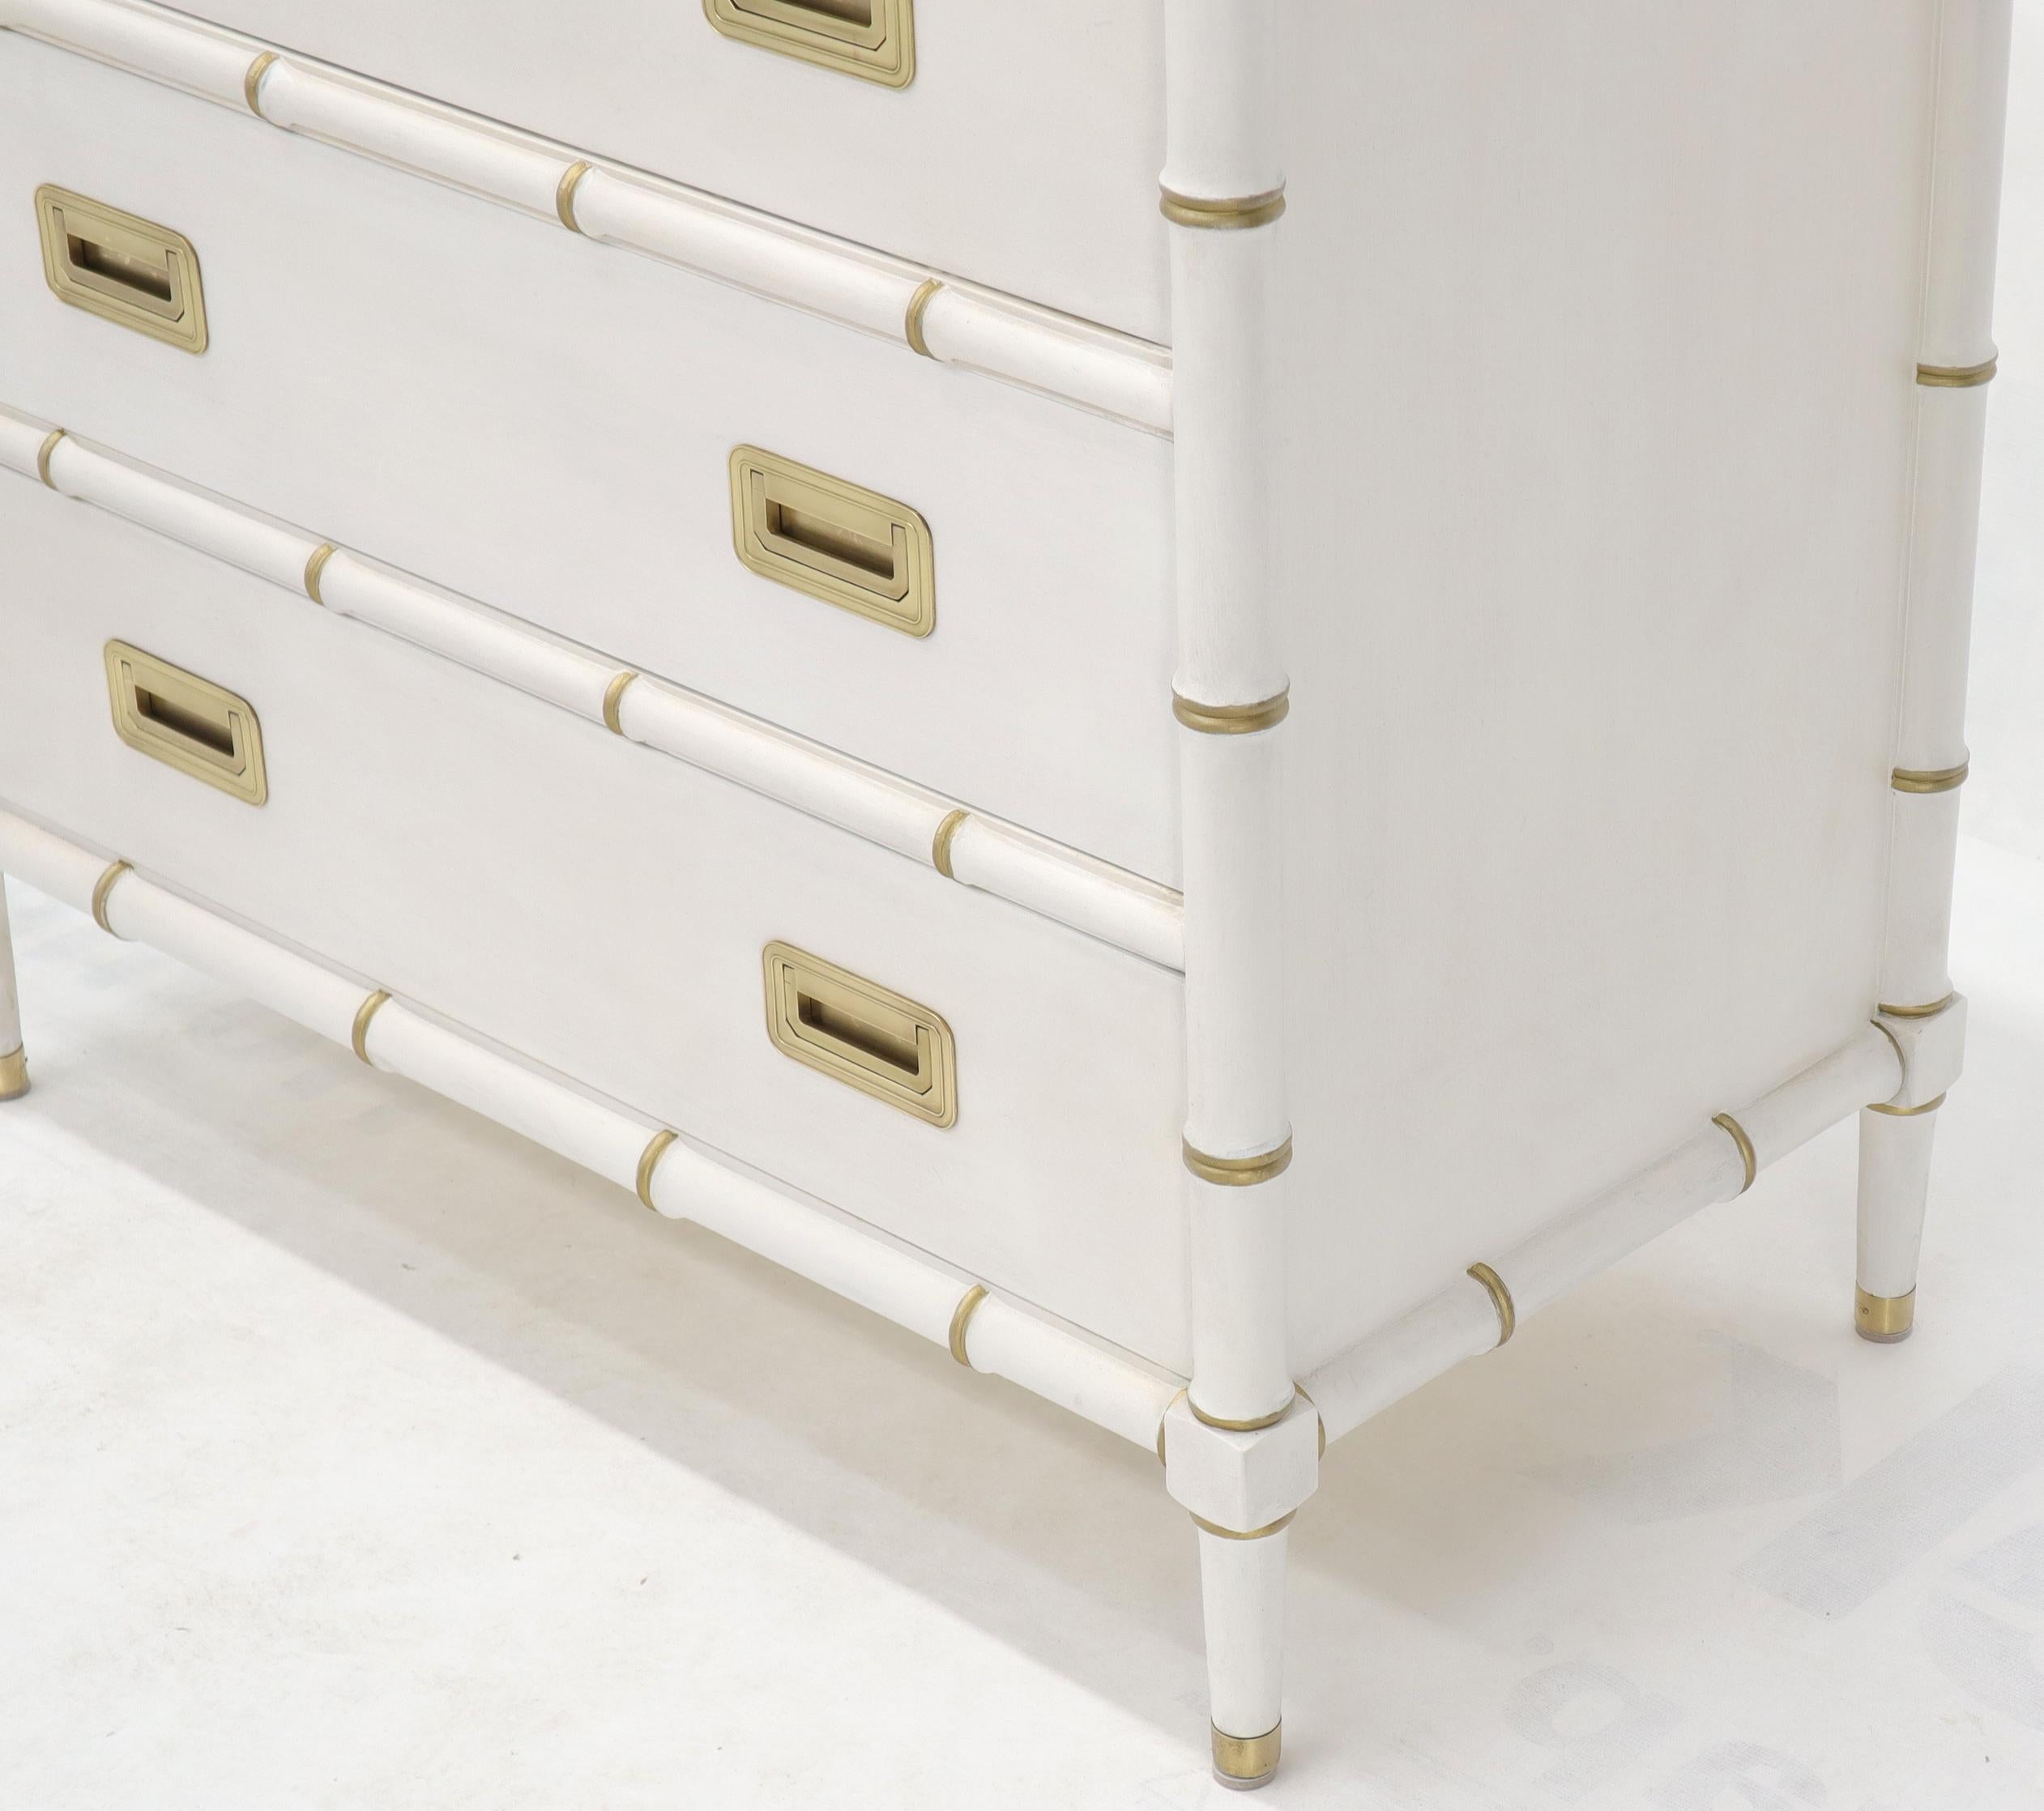 Pair of White Lacquer Brass Hardware Bachelor Chest with Suspended Brass Vanity For Sale 6